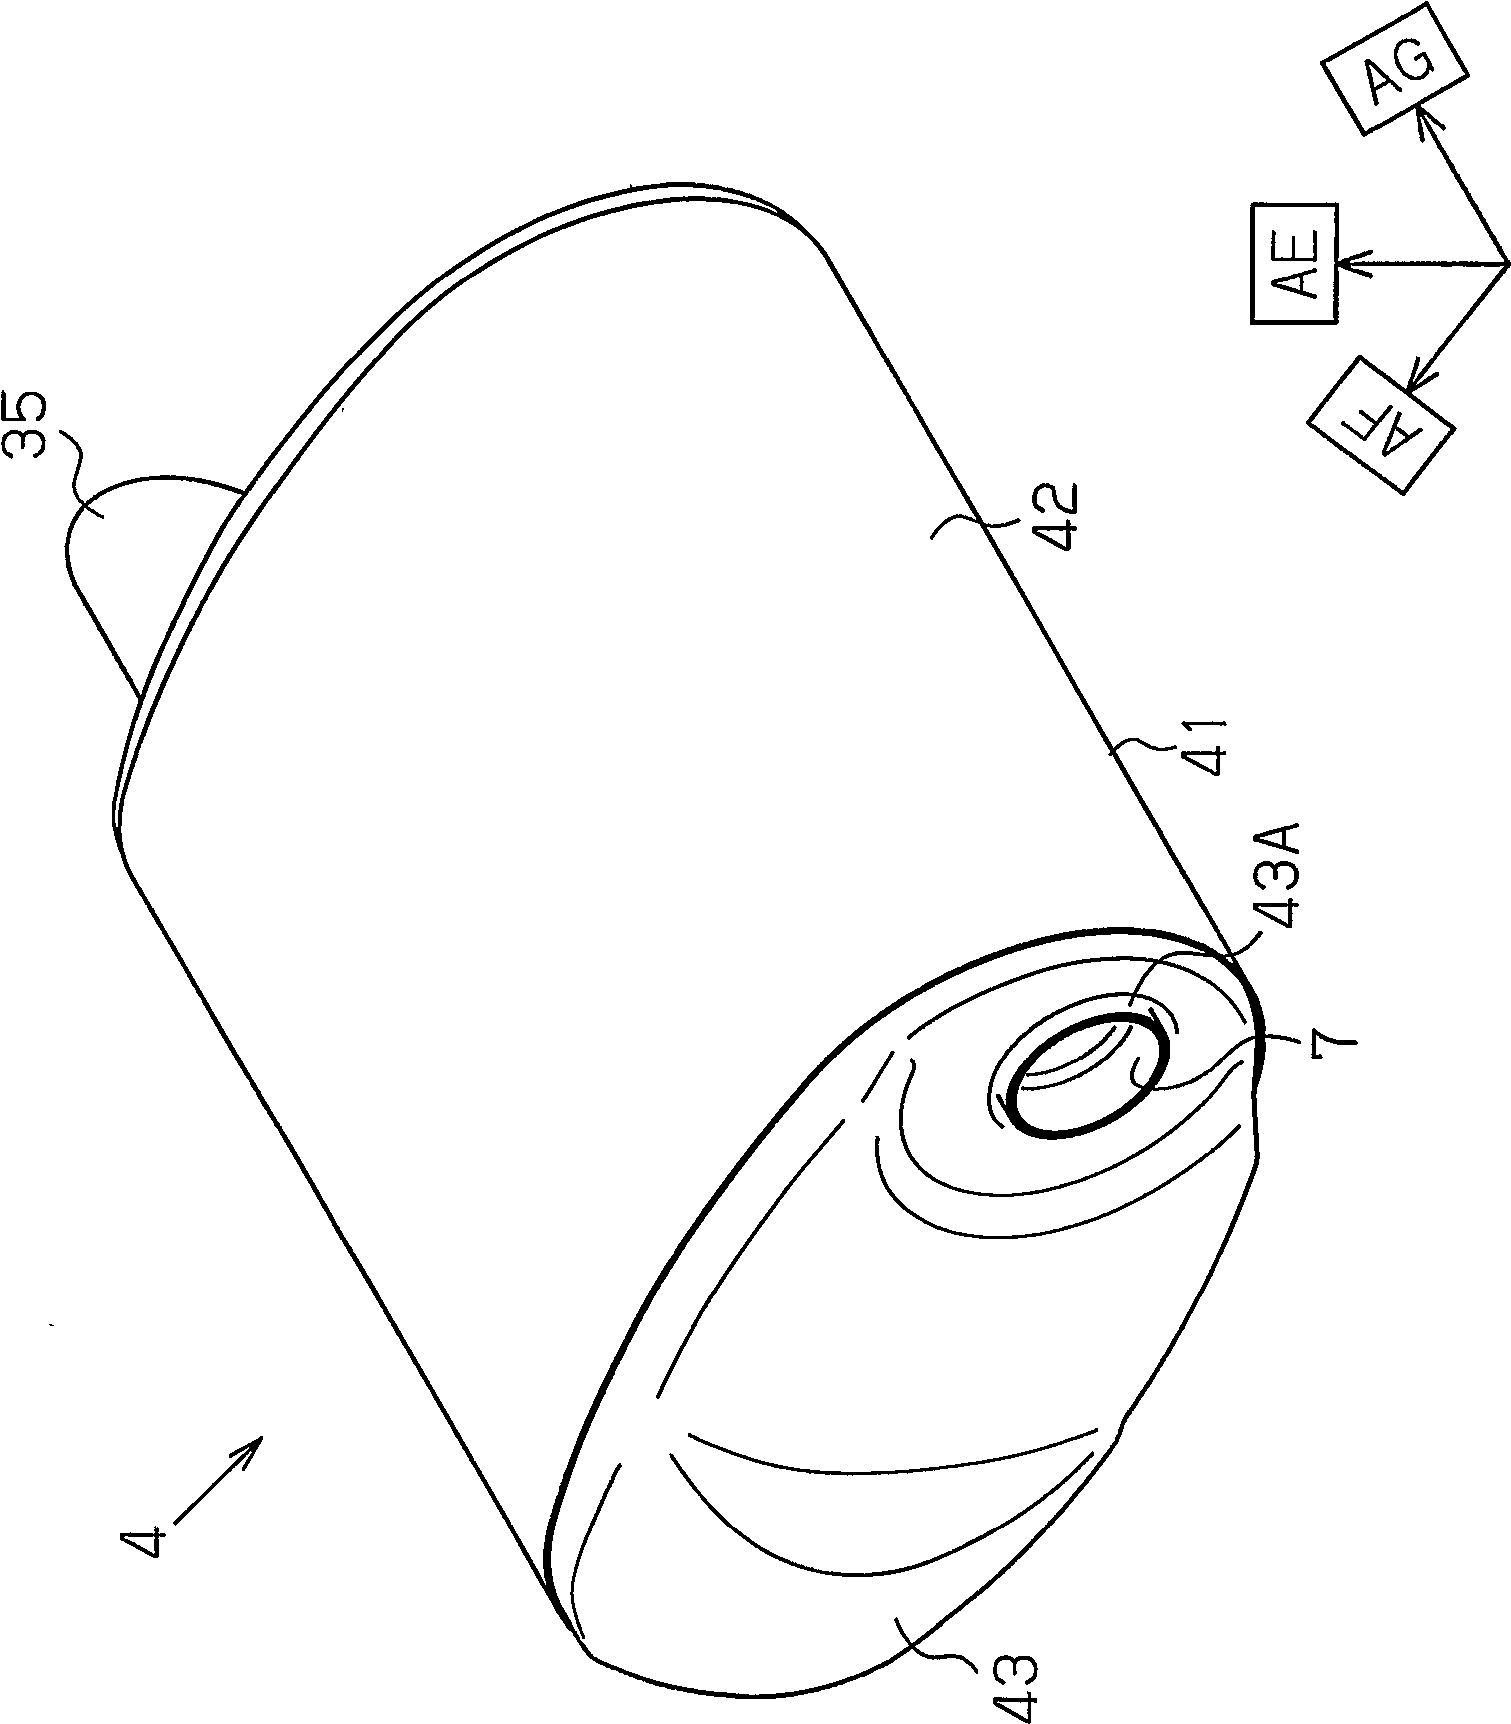 Exhaust device for engine